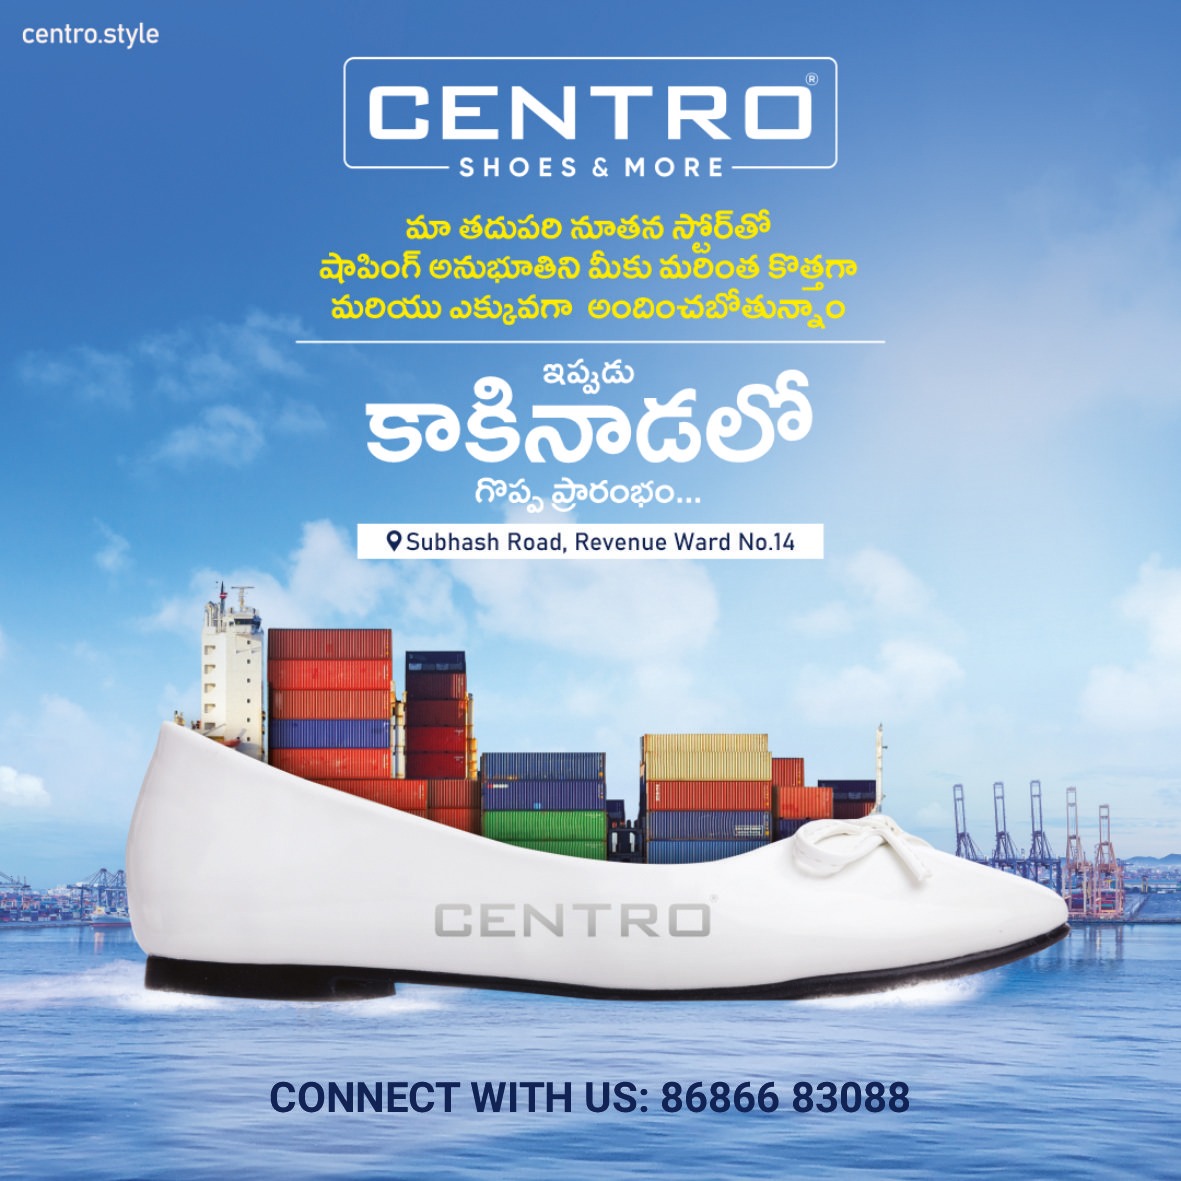 Experience unparalleled fashion at Centro's new store in Kakinada! Step into chic with our premium footwear brands. 

#centroshoes #newopening #kakinada #shoestore #luxurybrands